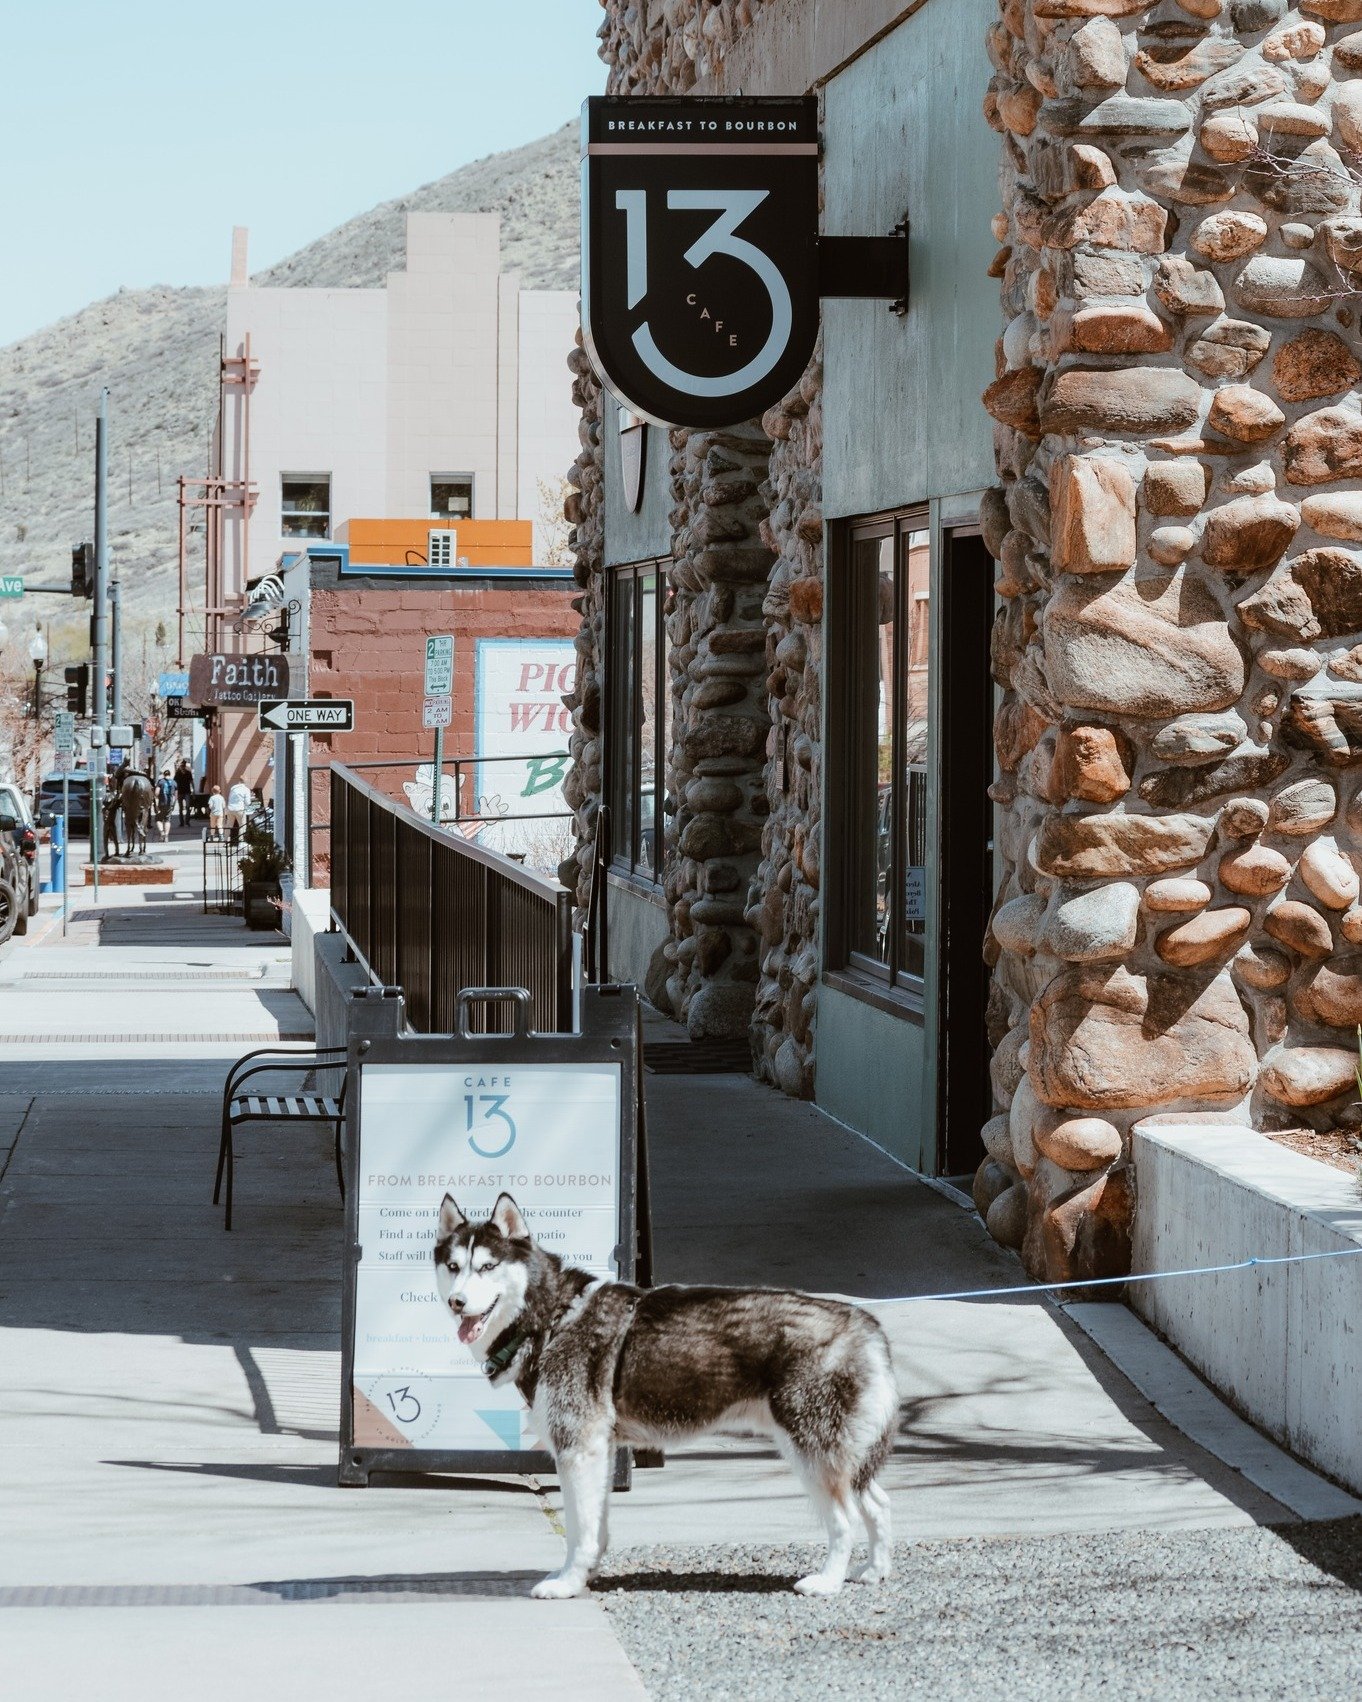 Feel free to let the dogs out on our dog-friendly patio! Order from our to-go window and enjoy your favorite Cafe 13 specialties with you best friend. The weather is gorgeous all week, why not stop by? 

#dogfriendly #patio #spring #springtime #cafe1